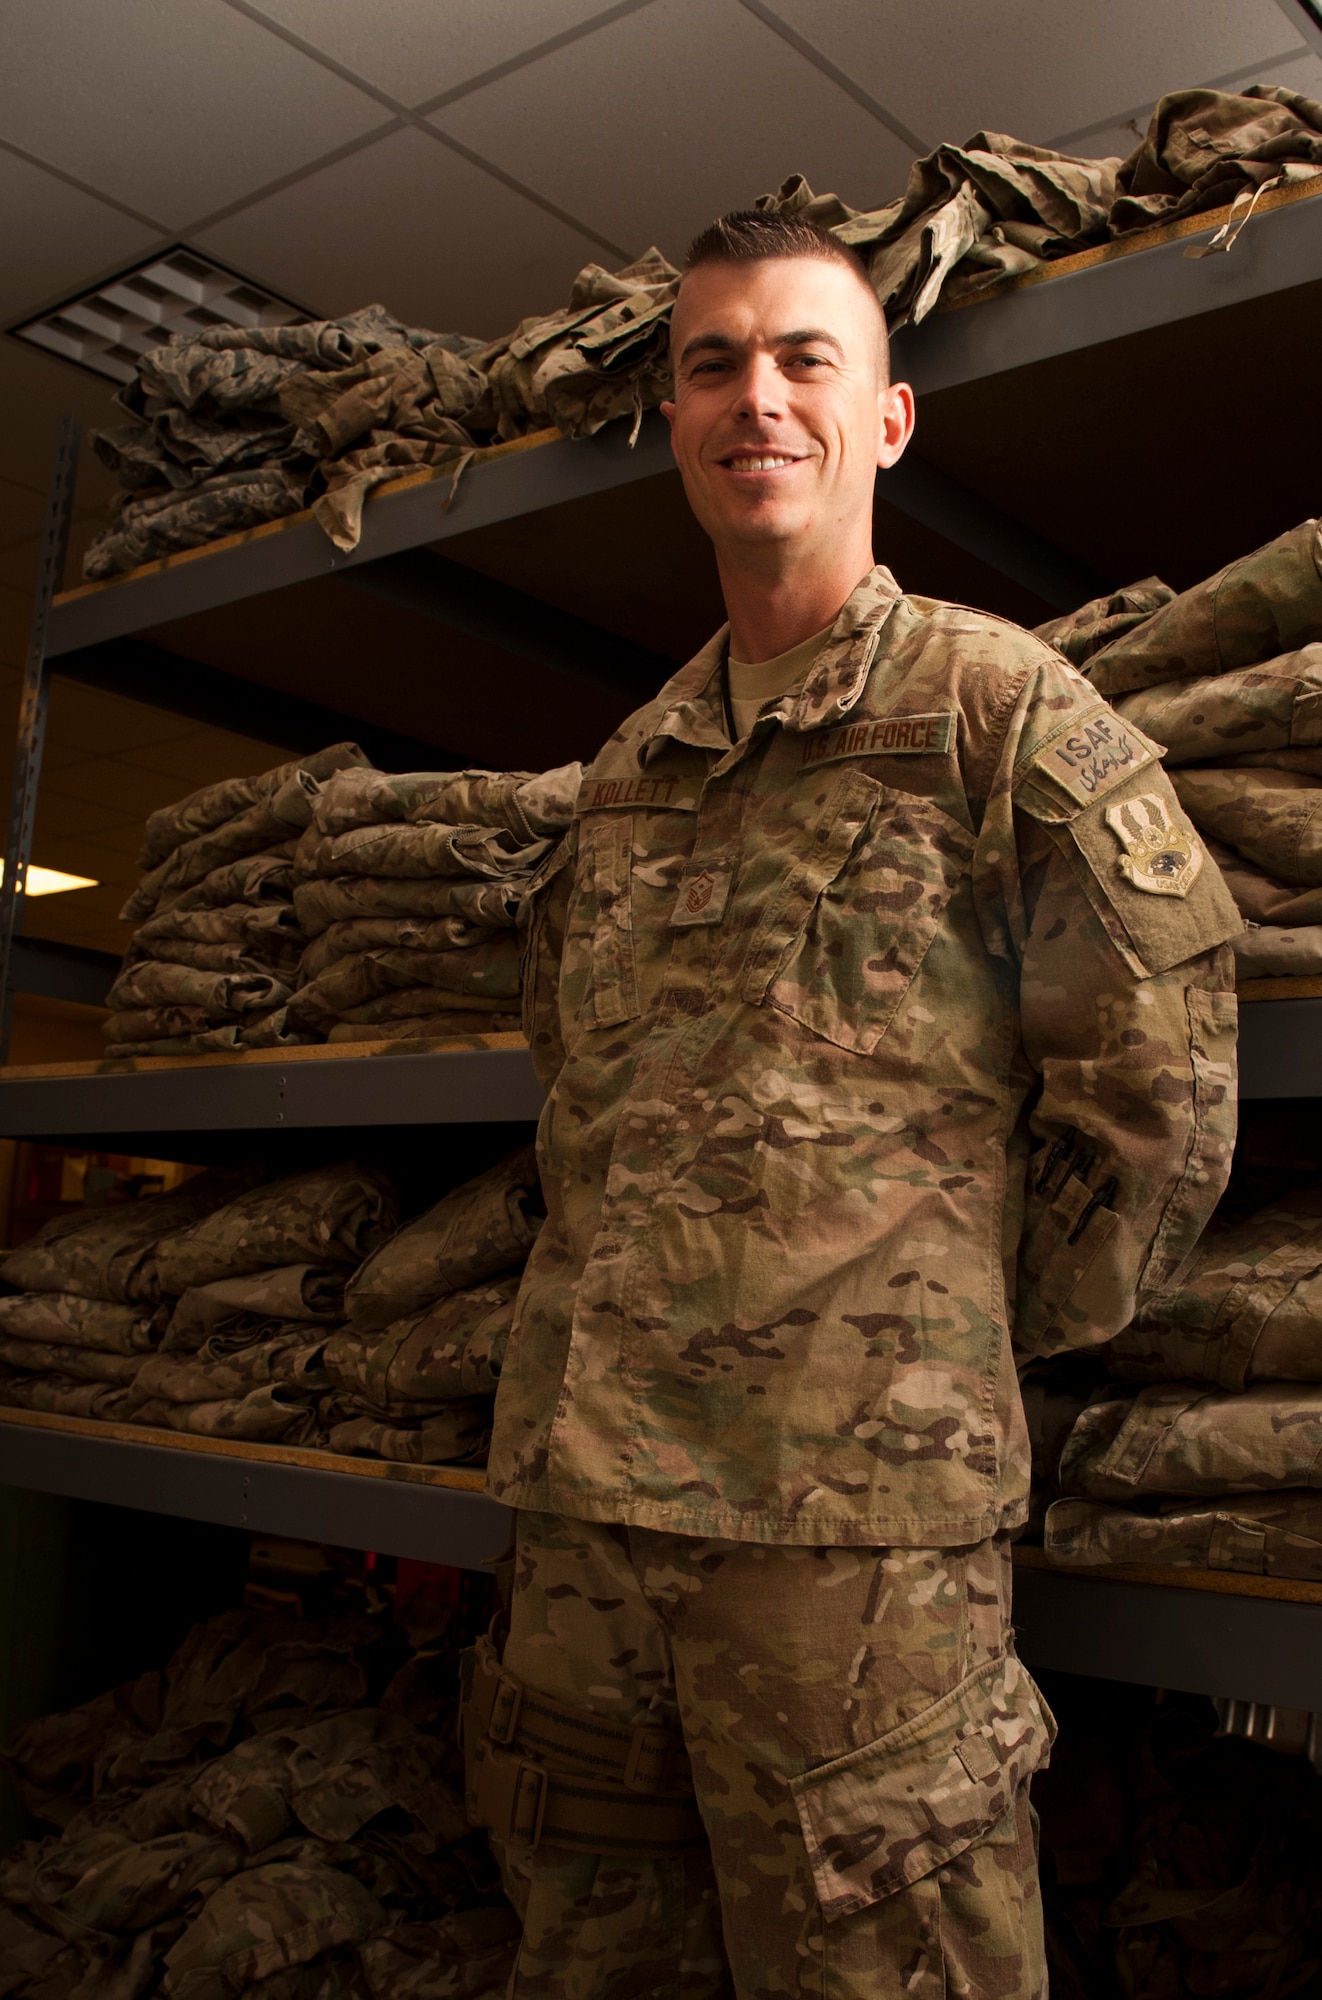 MSgt Nicholas Kollett, First Sergeant for the 455th Expeditionary Aircraft Maintenance Squadron stands in front of shelves of recycled Operation Enduring Freedom Camouflage Pattern uniforms at Bagram Airfield, Afghanistan, July 7, 2012. To date, Kollett has reissued over 1,000 OCP uniform sets, valued at over $250,000, to BAF Airmen at no cost, providing comfort from arid temperatures and facilitating a safer working environment. (U.S. Air Force photo/Capt. Raymond Geoffroy)